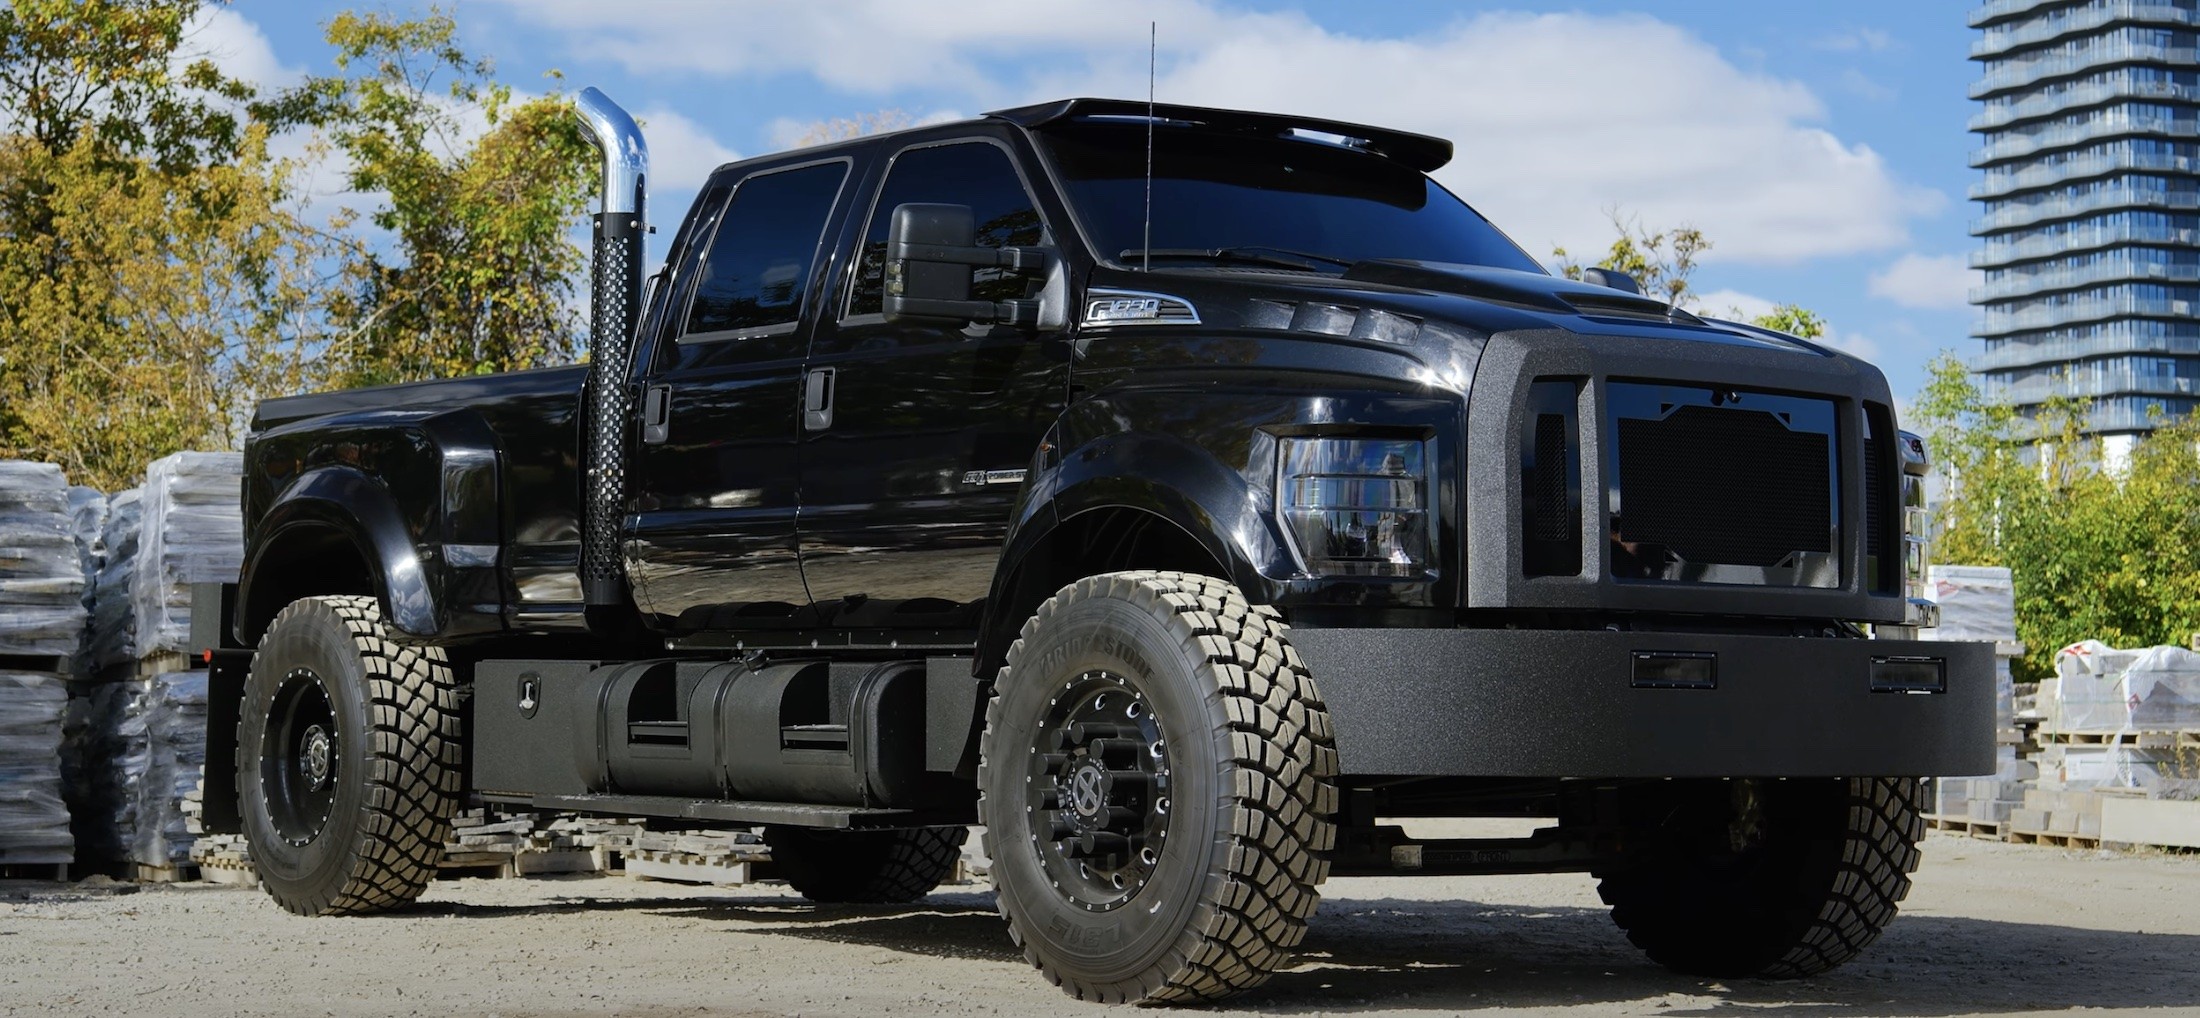 Ford F-650 Super Truck Makes No Sense Whatsoever, It Is a Bully on